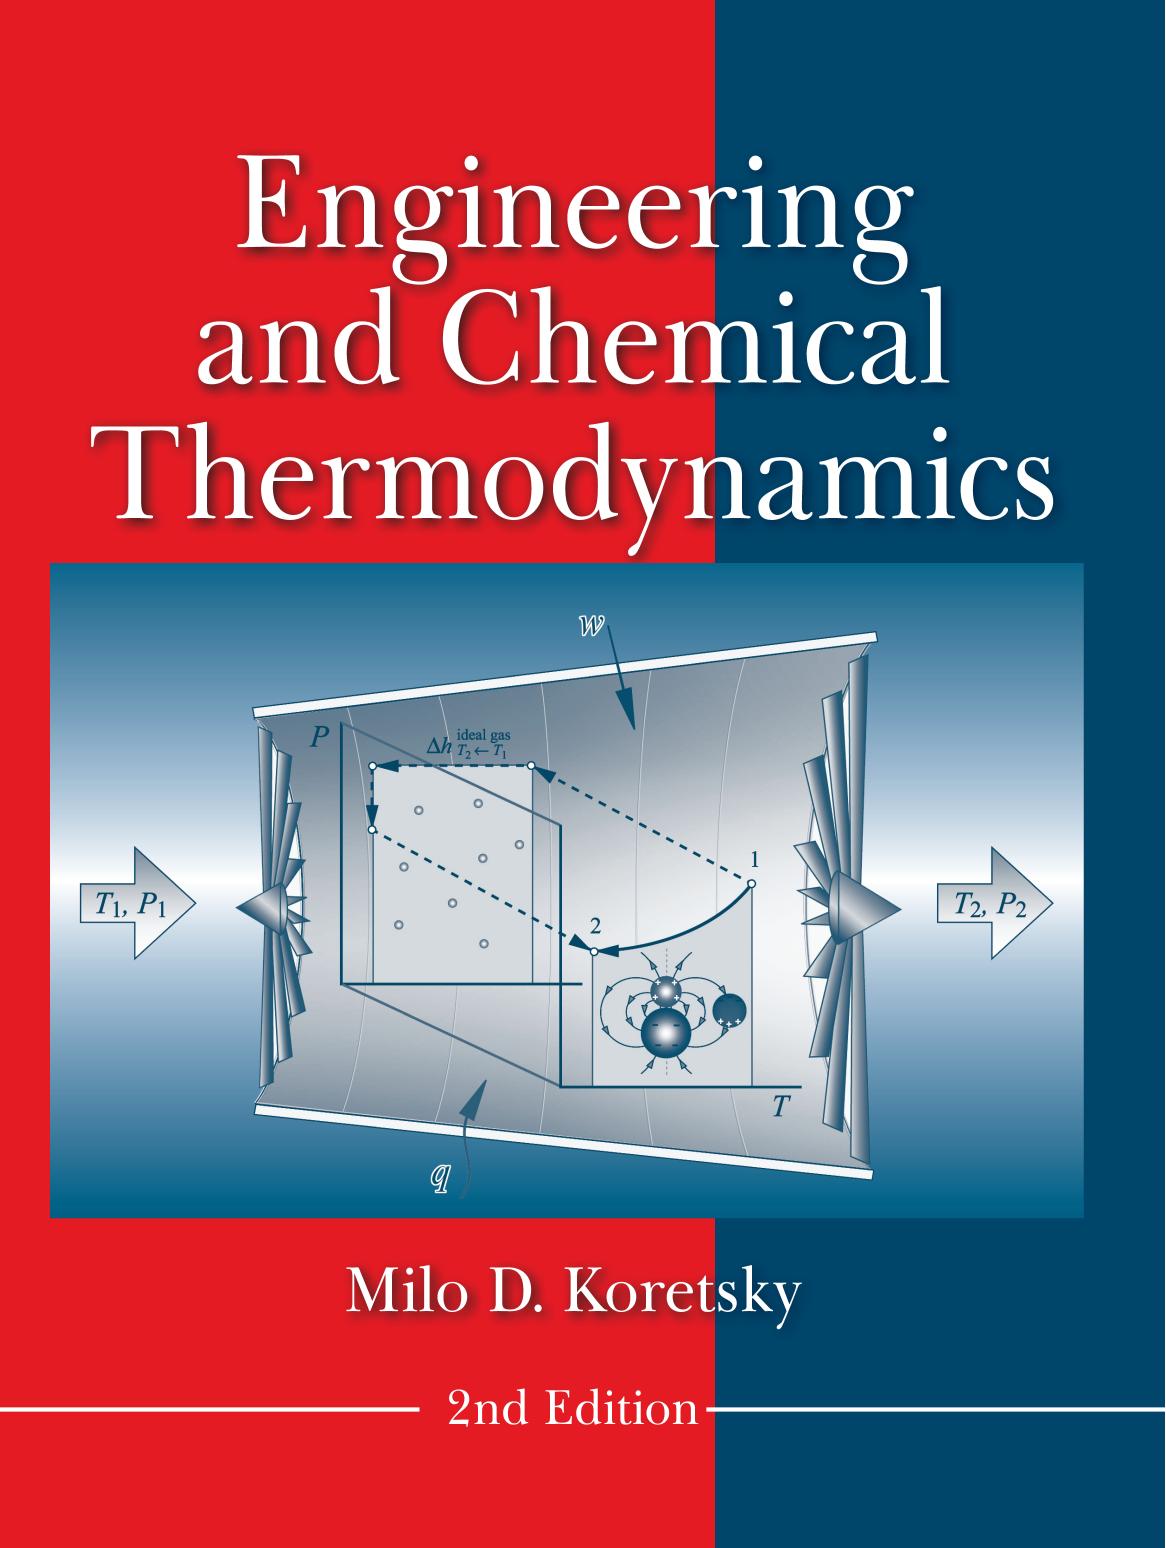 introduction to chemical engineering thermodynamics pdf